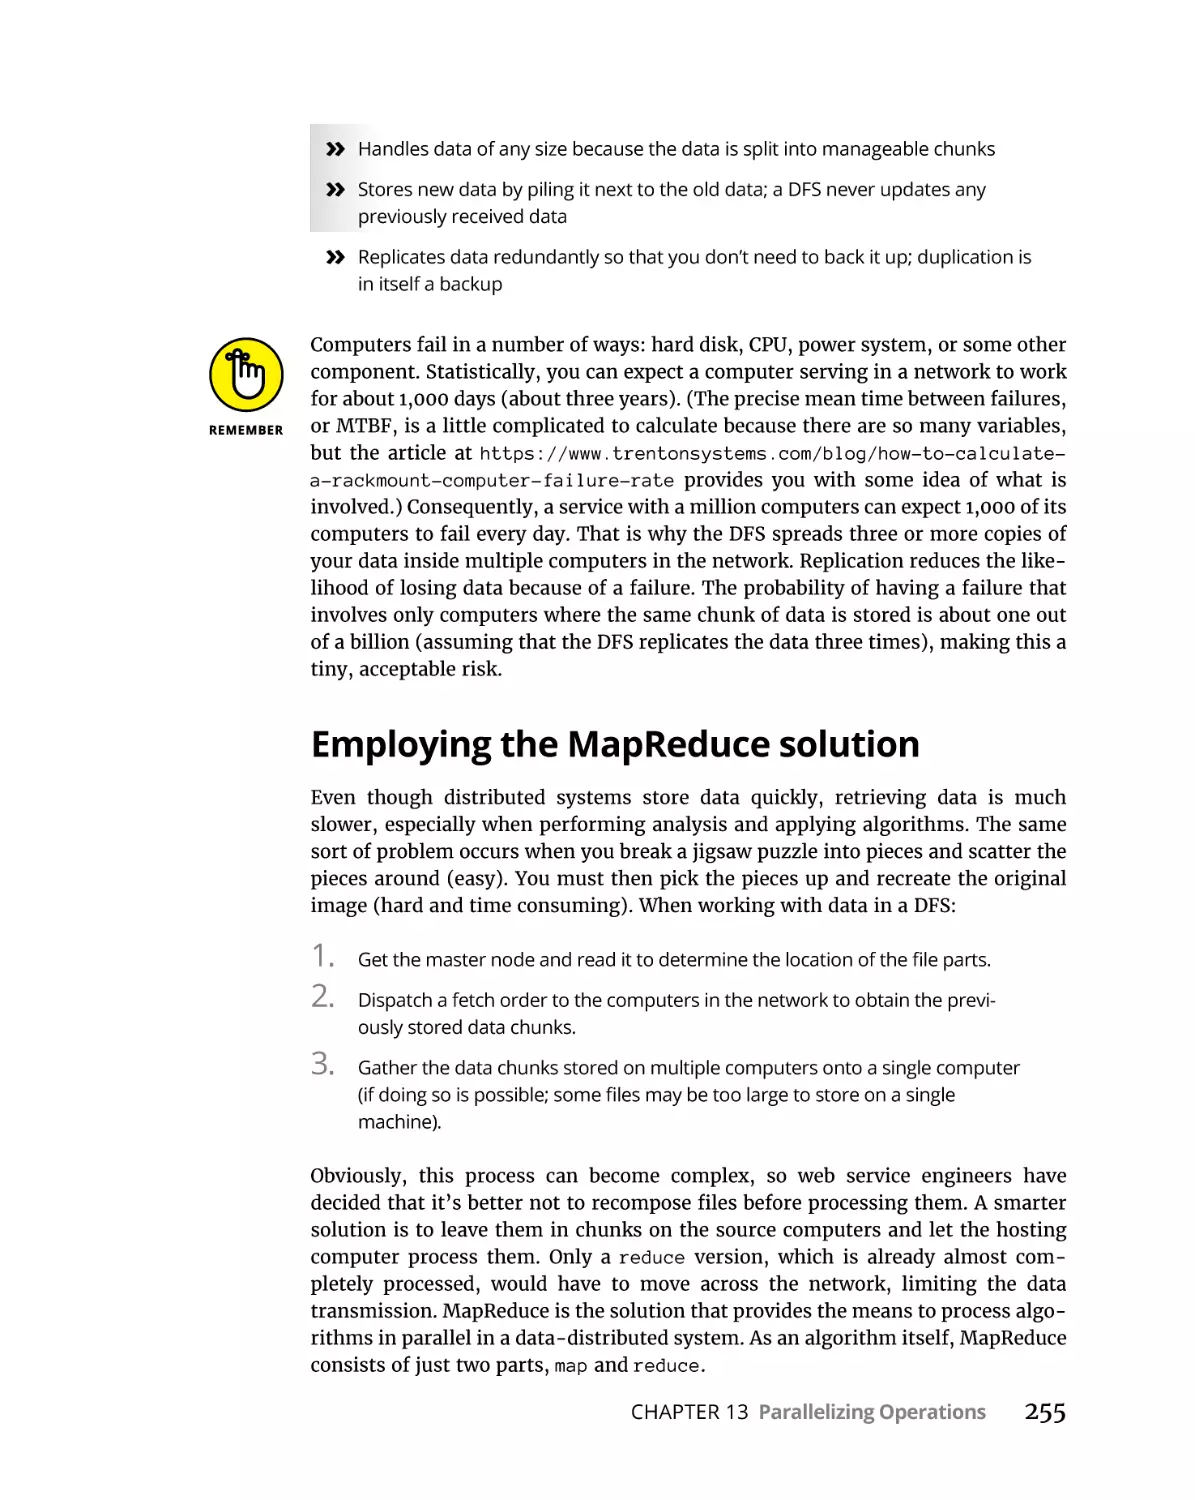 Employing the MapReduce solution